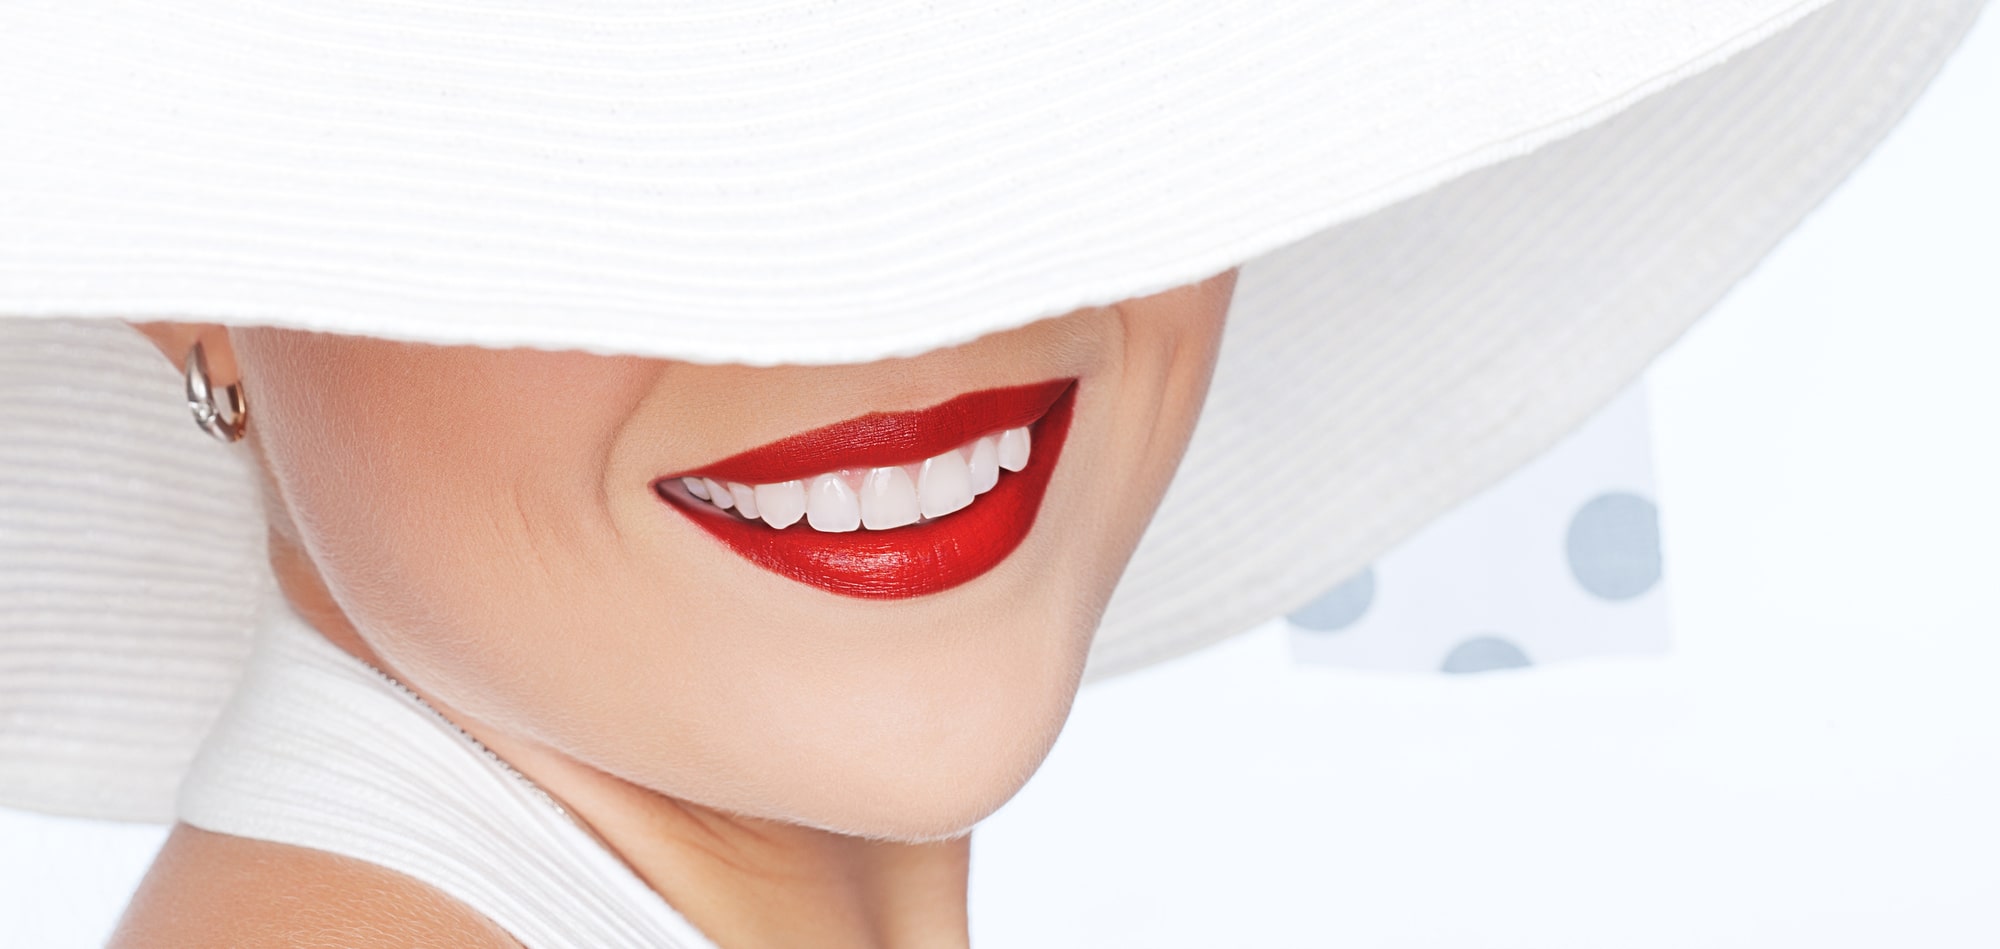 Learn more about the American Academy of Cosmetic Dentistry